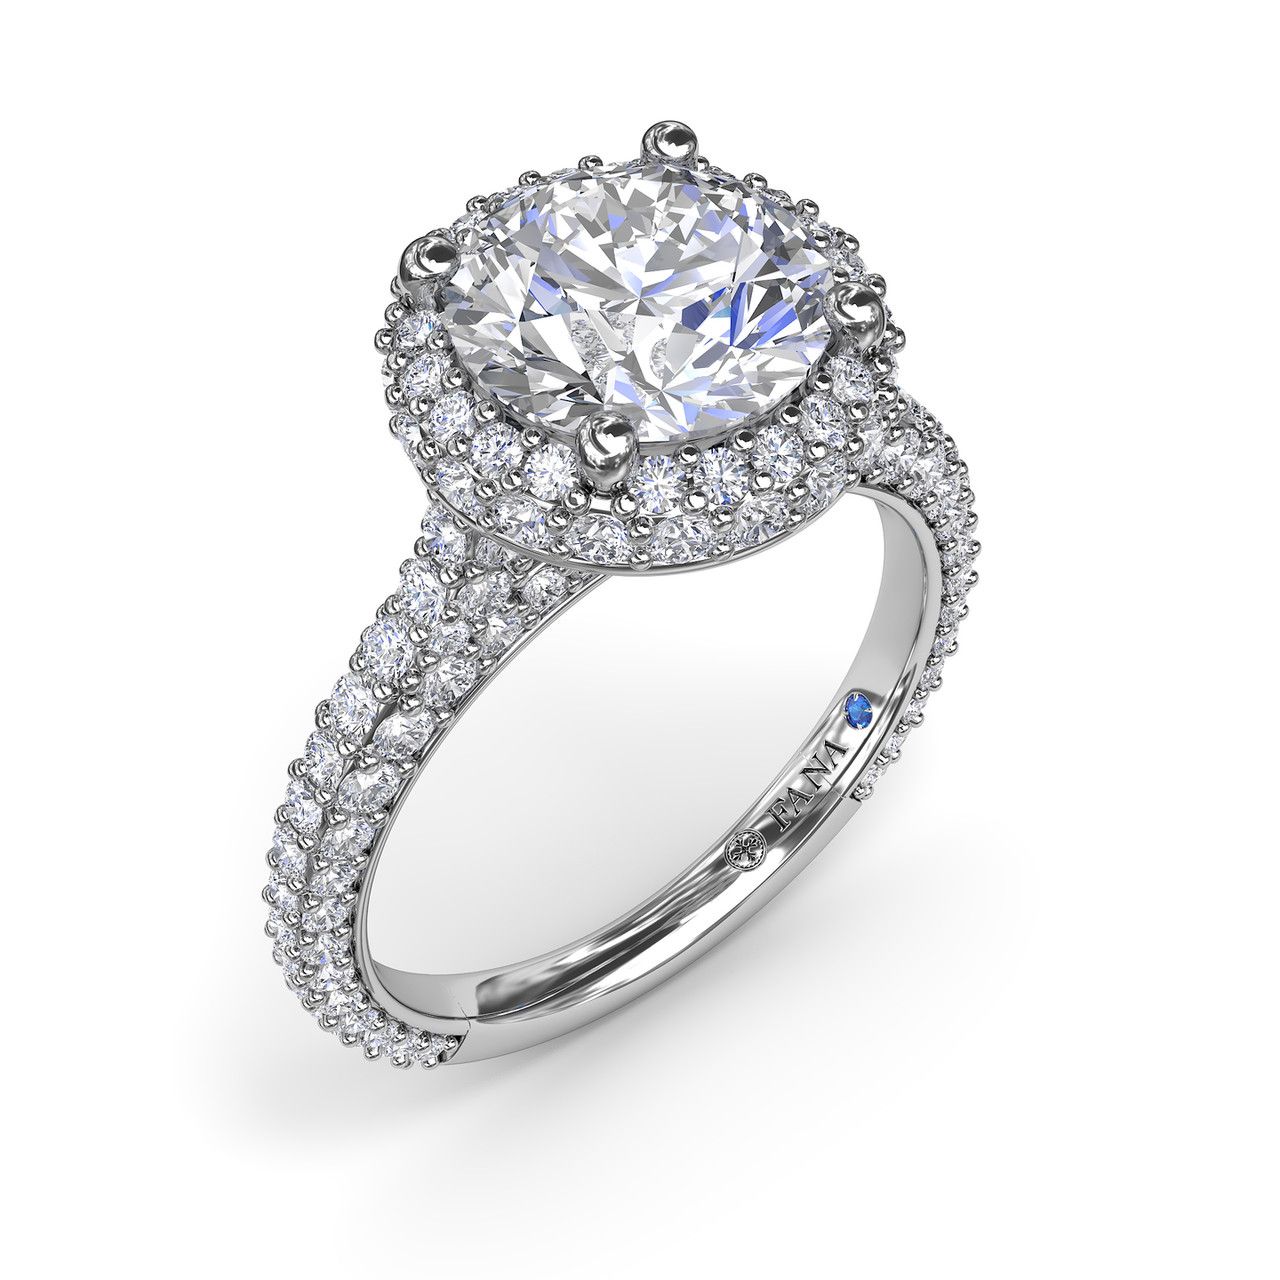 14K WHITE GOLD HALO SEMI-MOUNT RING SIZE 6.5 WITH 164=1.48TW ROUND G-H VS2-SI1 DIAMONDS AND ONE ROUND BLUE SAPPHIRE  (5.02 GRAMS)